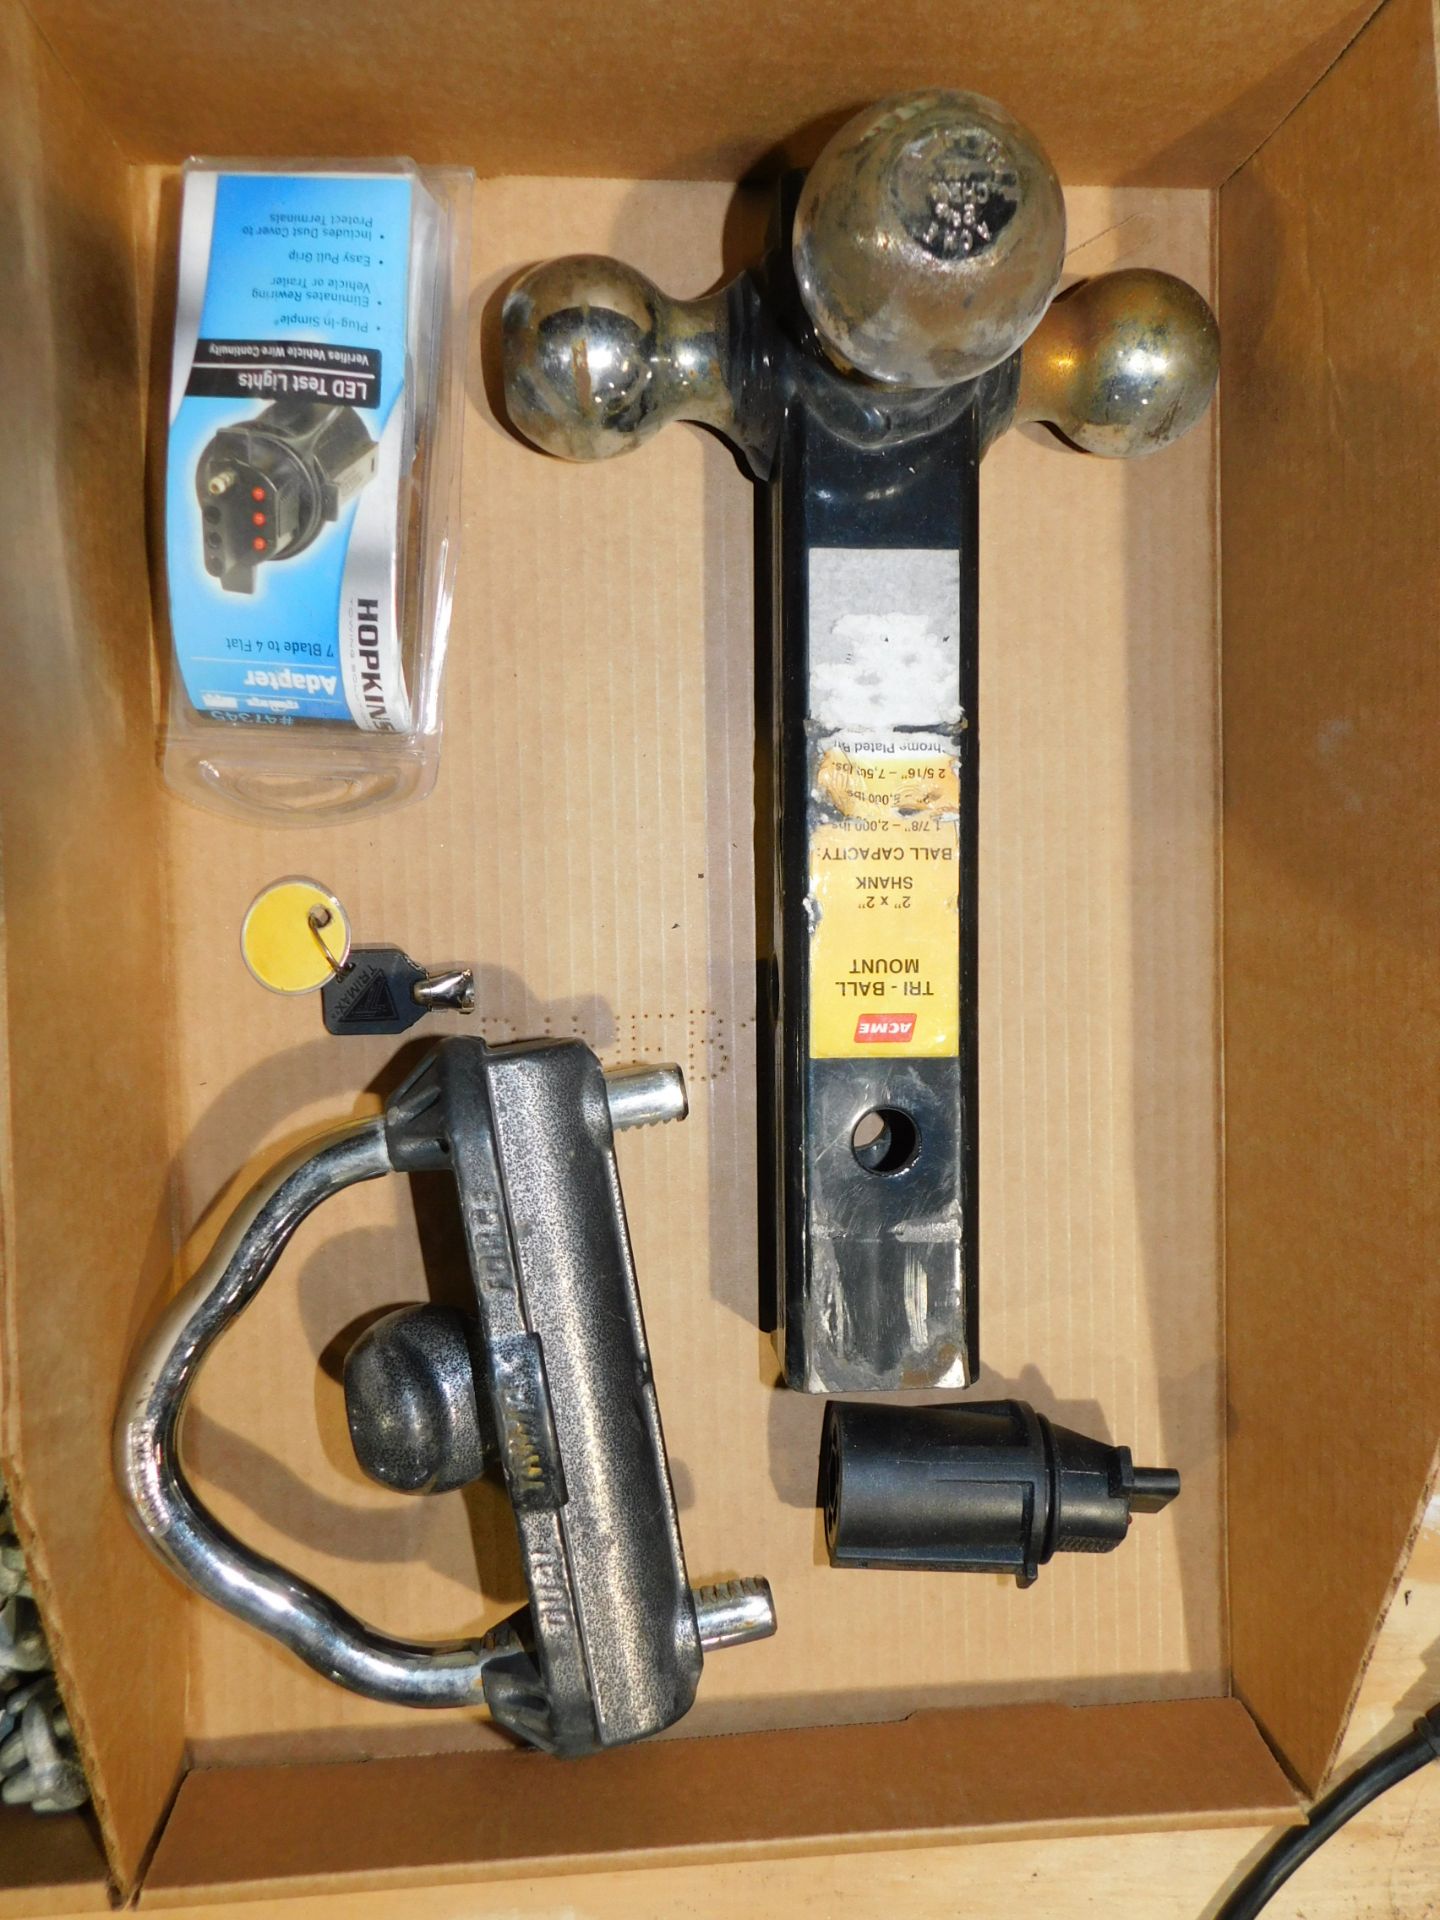 Trailer Hitch, Trailer Ball Lock, and Trailer Plug Adapter